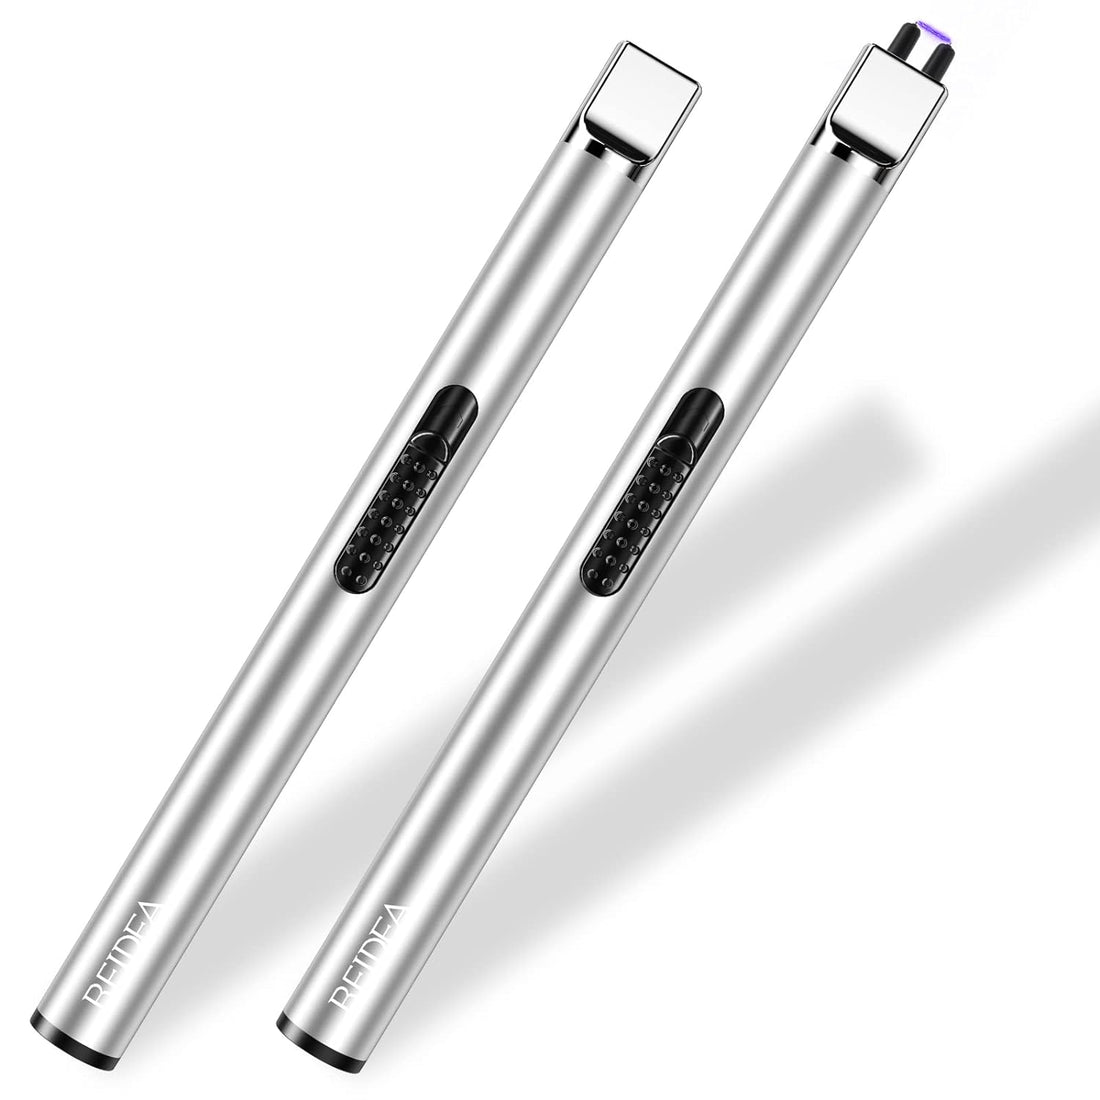 REIDEA Candle Lighter, Electric Arc Lighter with Safe Protector Button, USB Rechargeable Lighter Perfect for Camping Cooking BBQ Fireworks (2 Pack) Silver